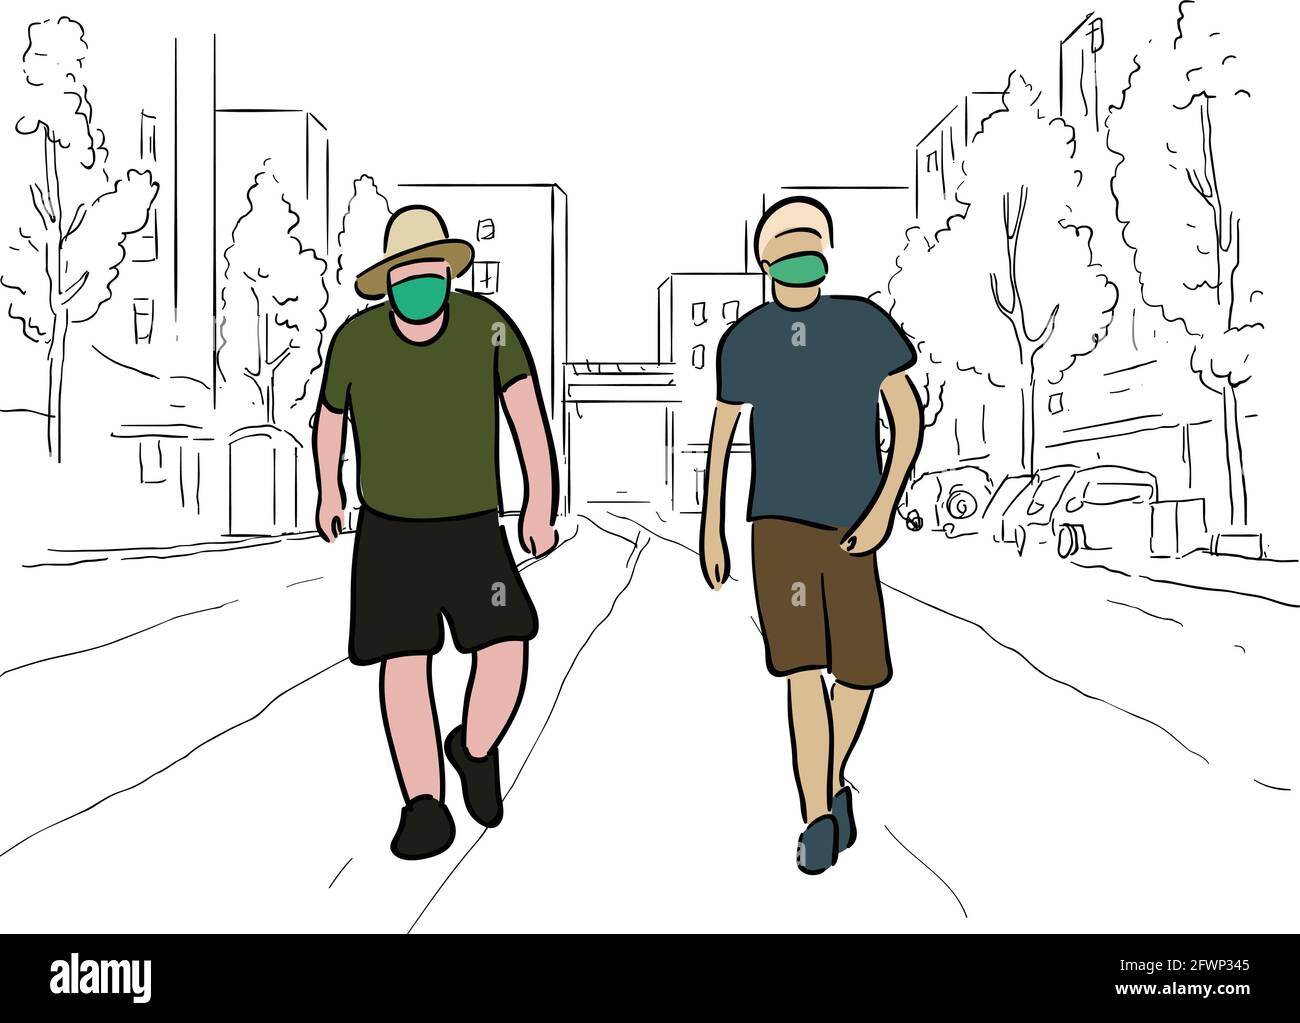 Men walking in street with face mask illustration vector on hand drawn background Stock Vector